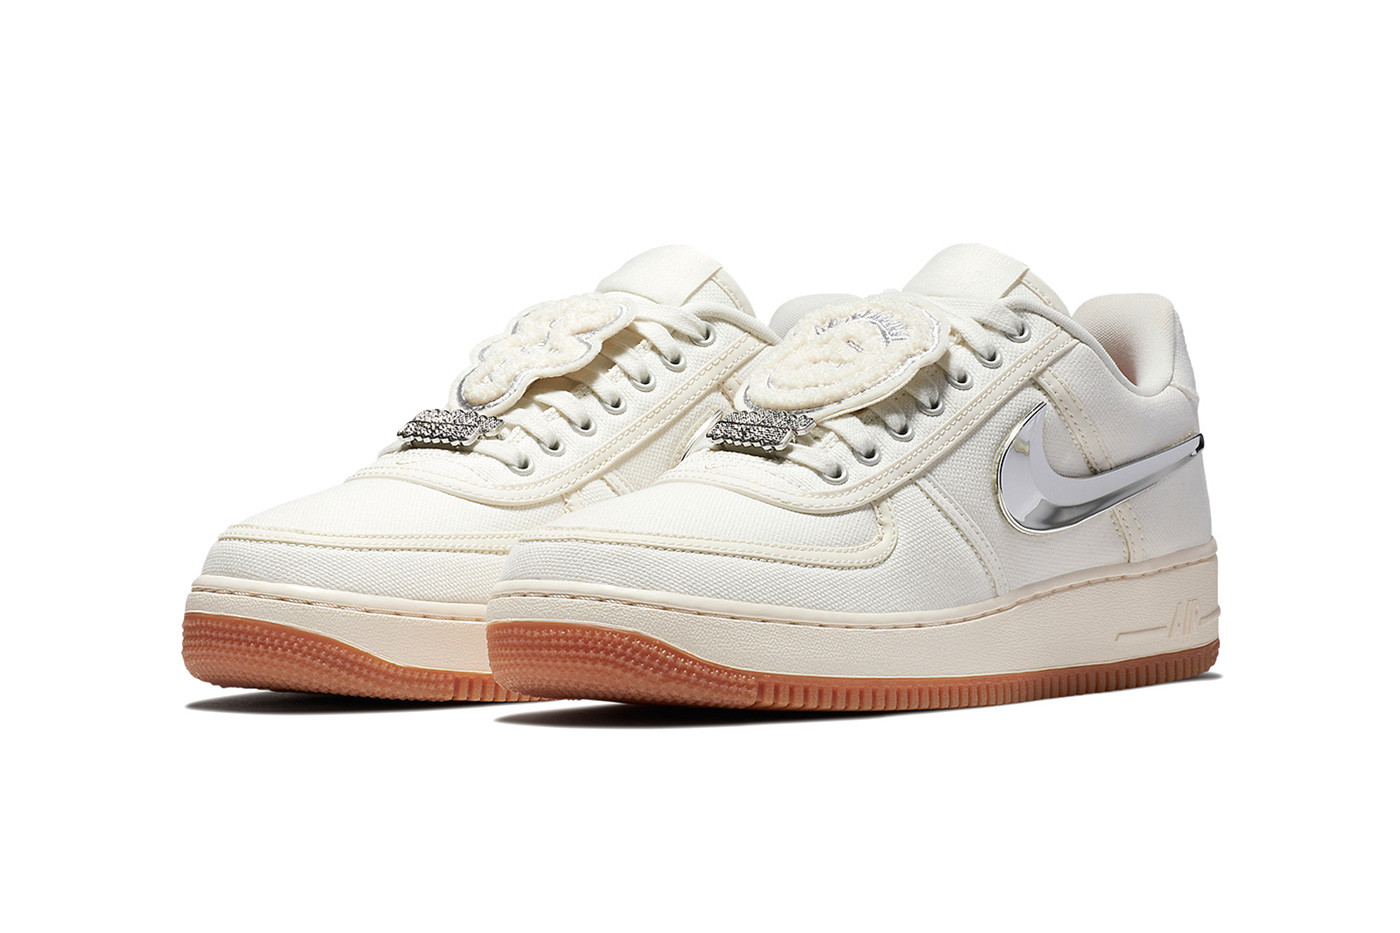 The Travis Scott x Nike Air Force 1 “Cactus Jack” in “Sail” is Rumoured to Drop Next Month